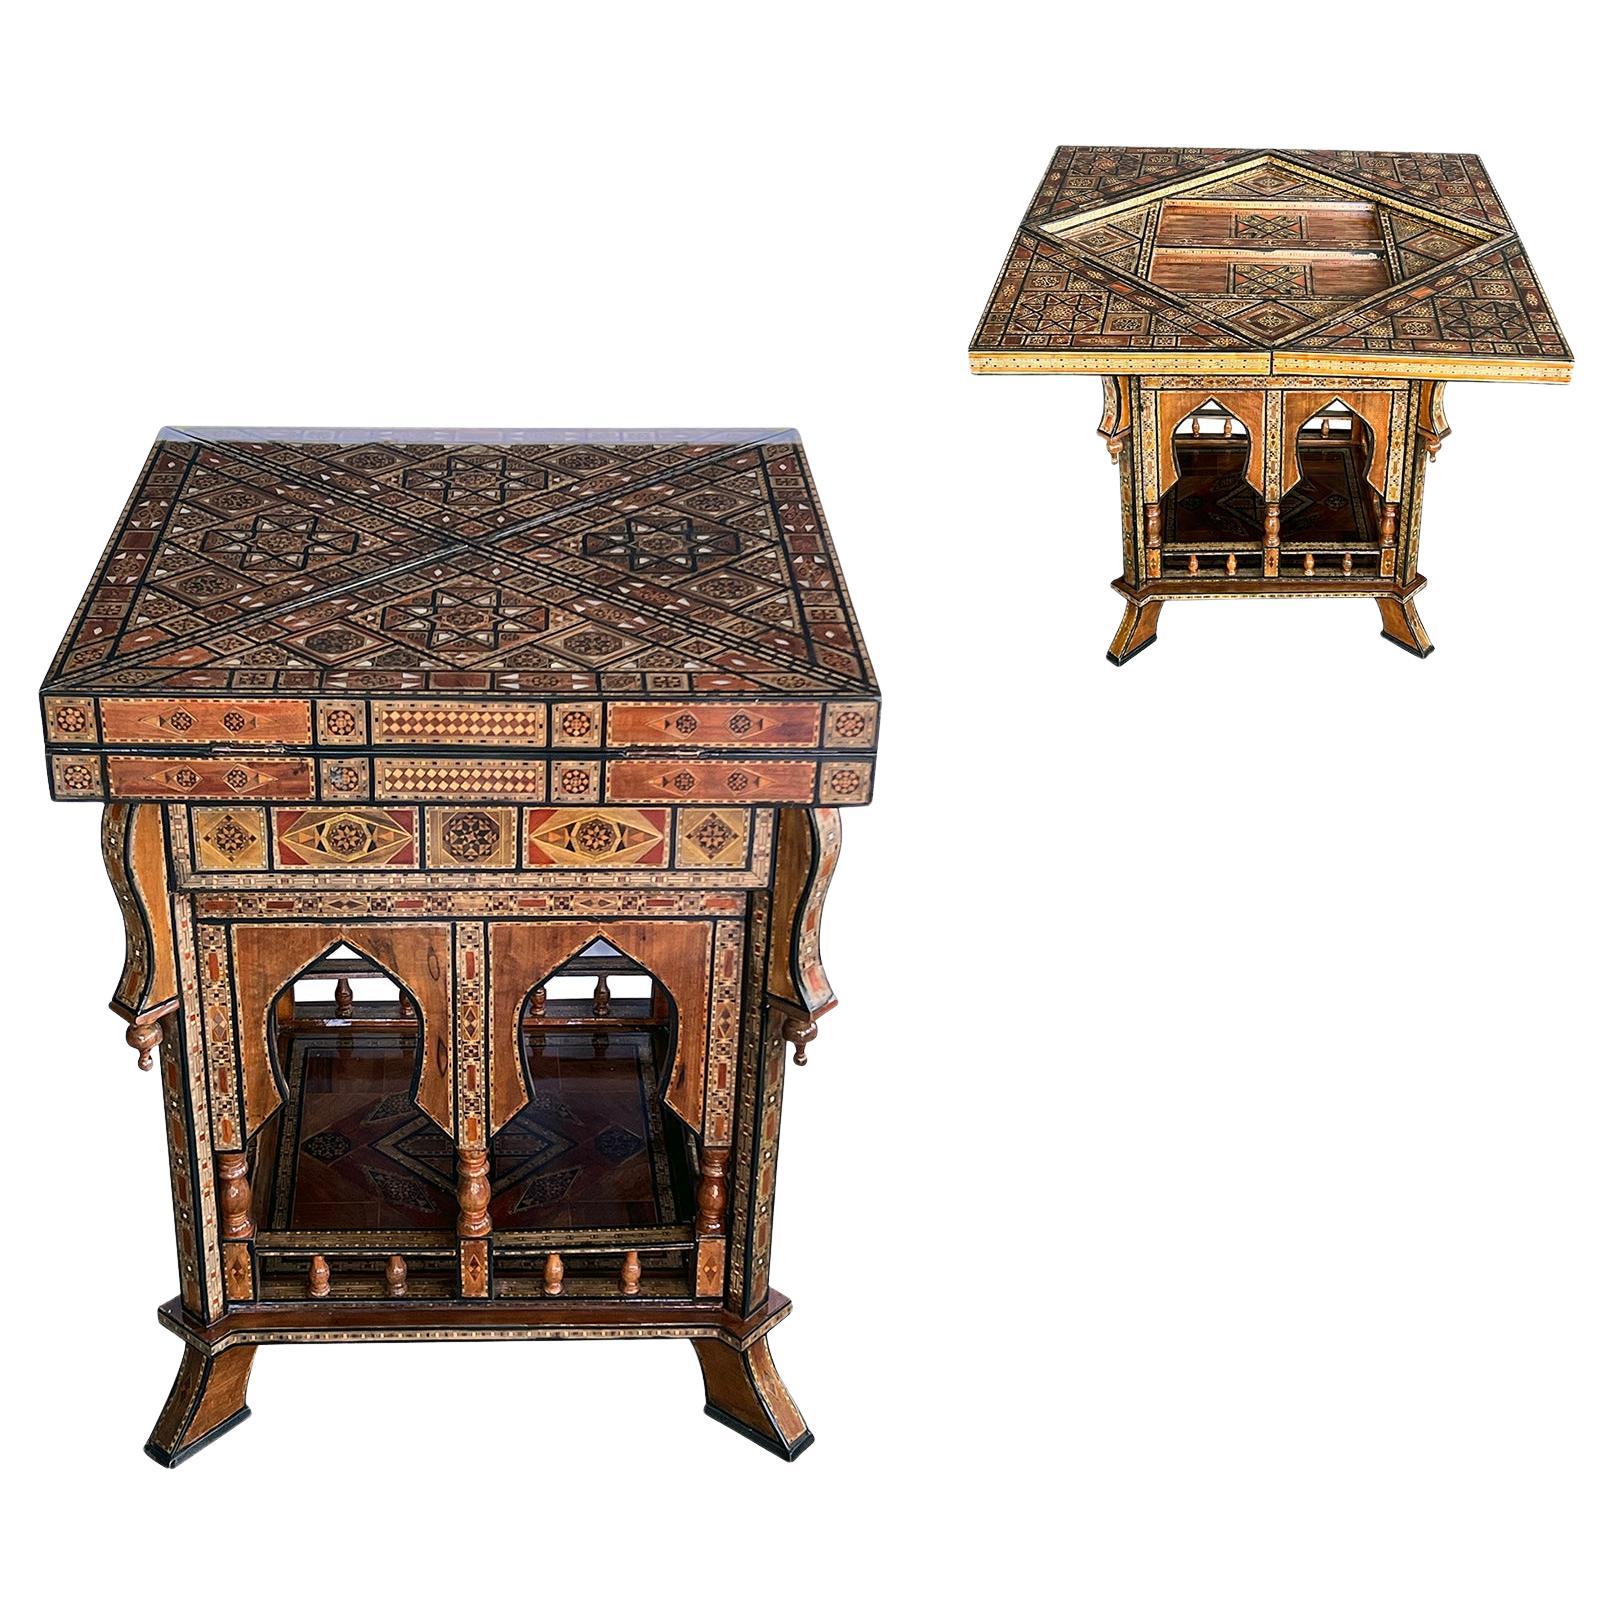 Intricately Inlaid Moorish Square Game Table with Pivoting Handkerchief Top For Sale